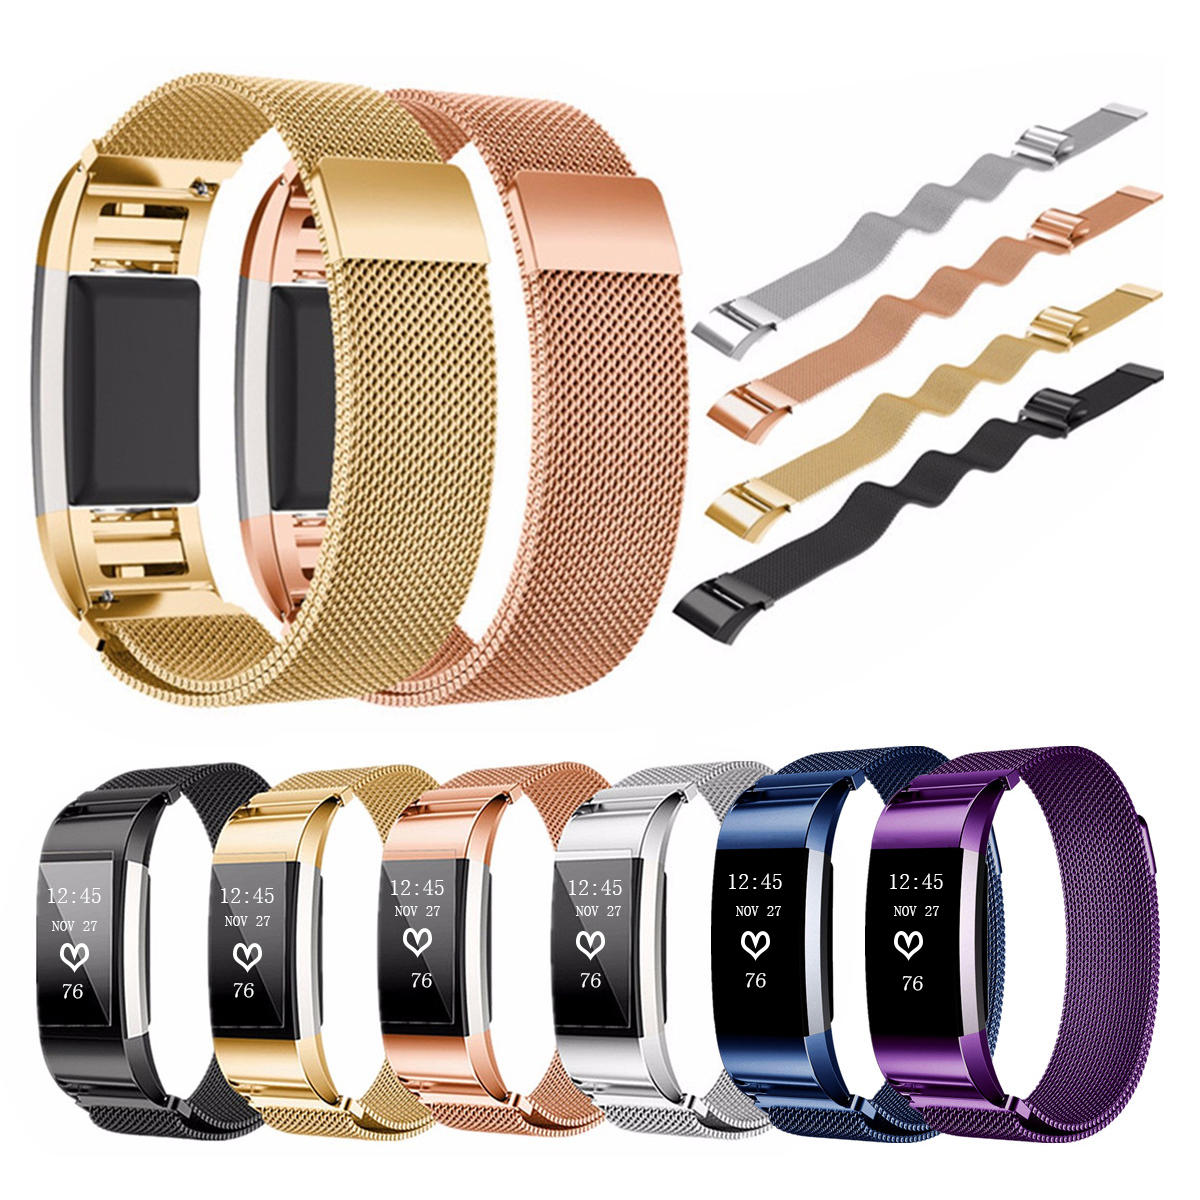 

Bakeey Replacement Magnetic Stainless Steel Wristband Strap For Fitbit Charge 2 Tracker